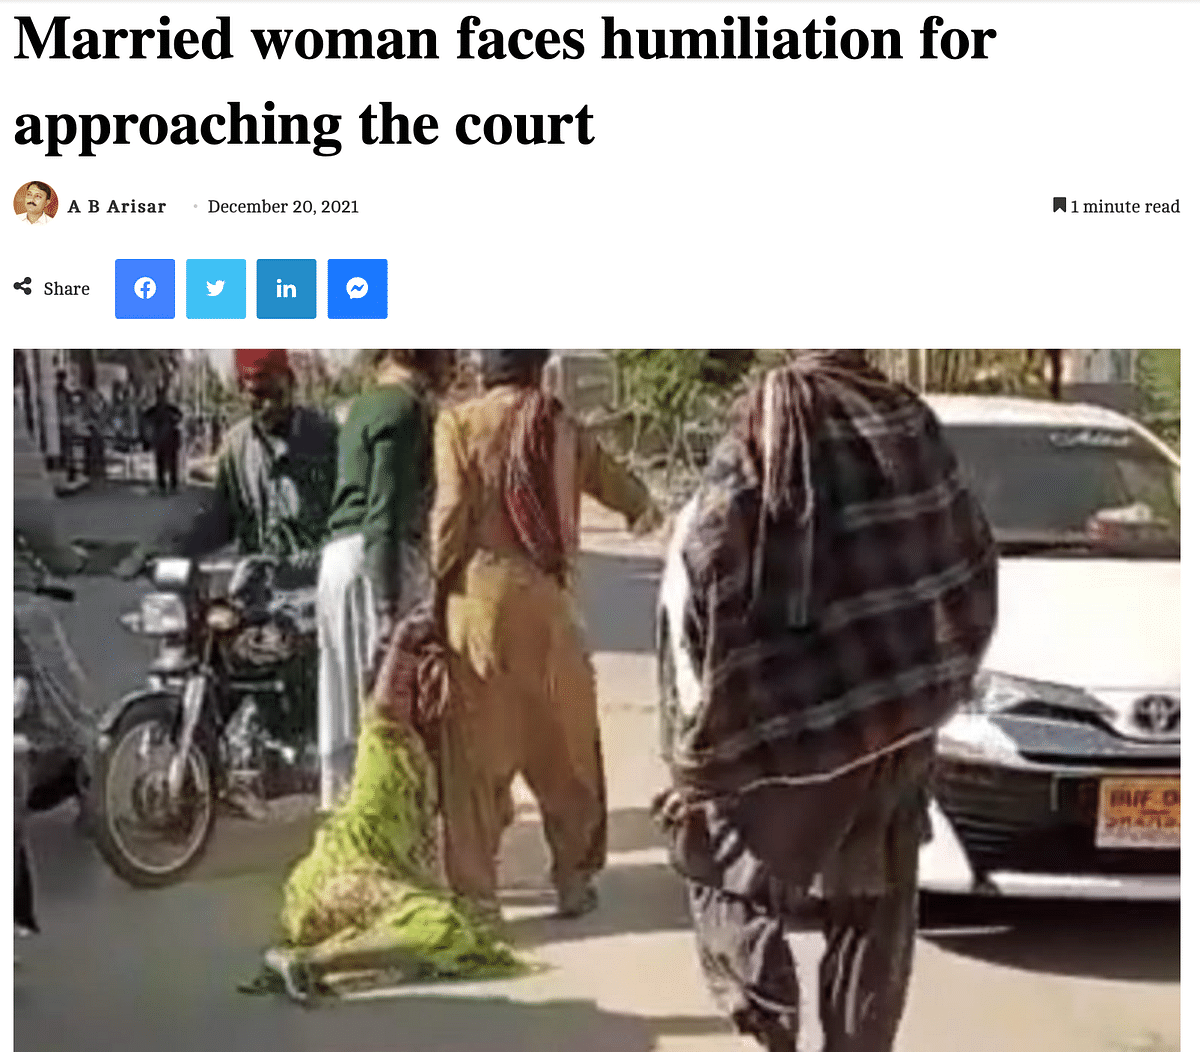 The video showed the husband of a woman trying to abduct her from a court where she had filed a complaint.